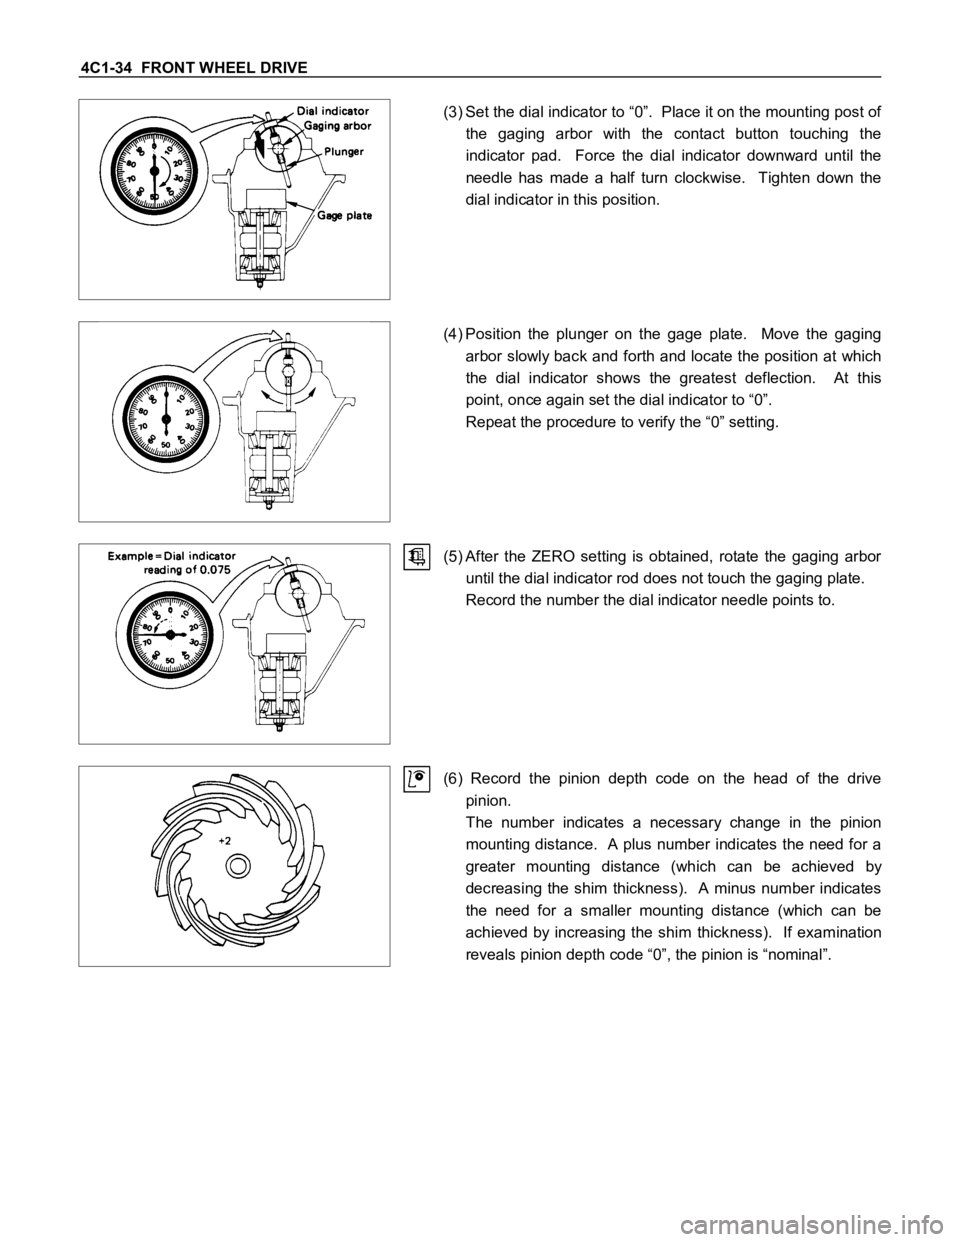 ISUZU TFS SERIES 1997  Workshop Manual 4C1-34  FRONT WHEEL DRIVE
(3) Set the dial indicator to “0”.  Place it on the mounting post of
the  gaging  arbor  with  the  contact  button  touching  the
indicator  pad.    Force  the  dial  in